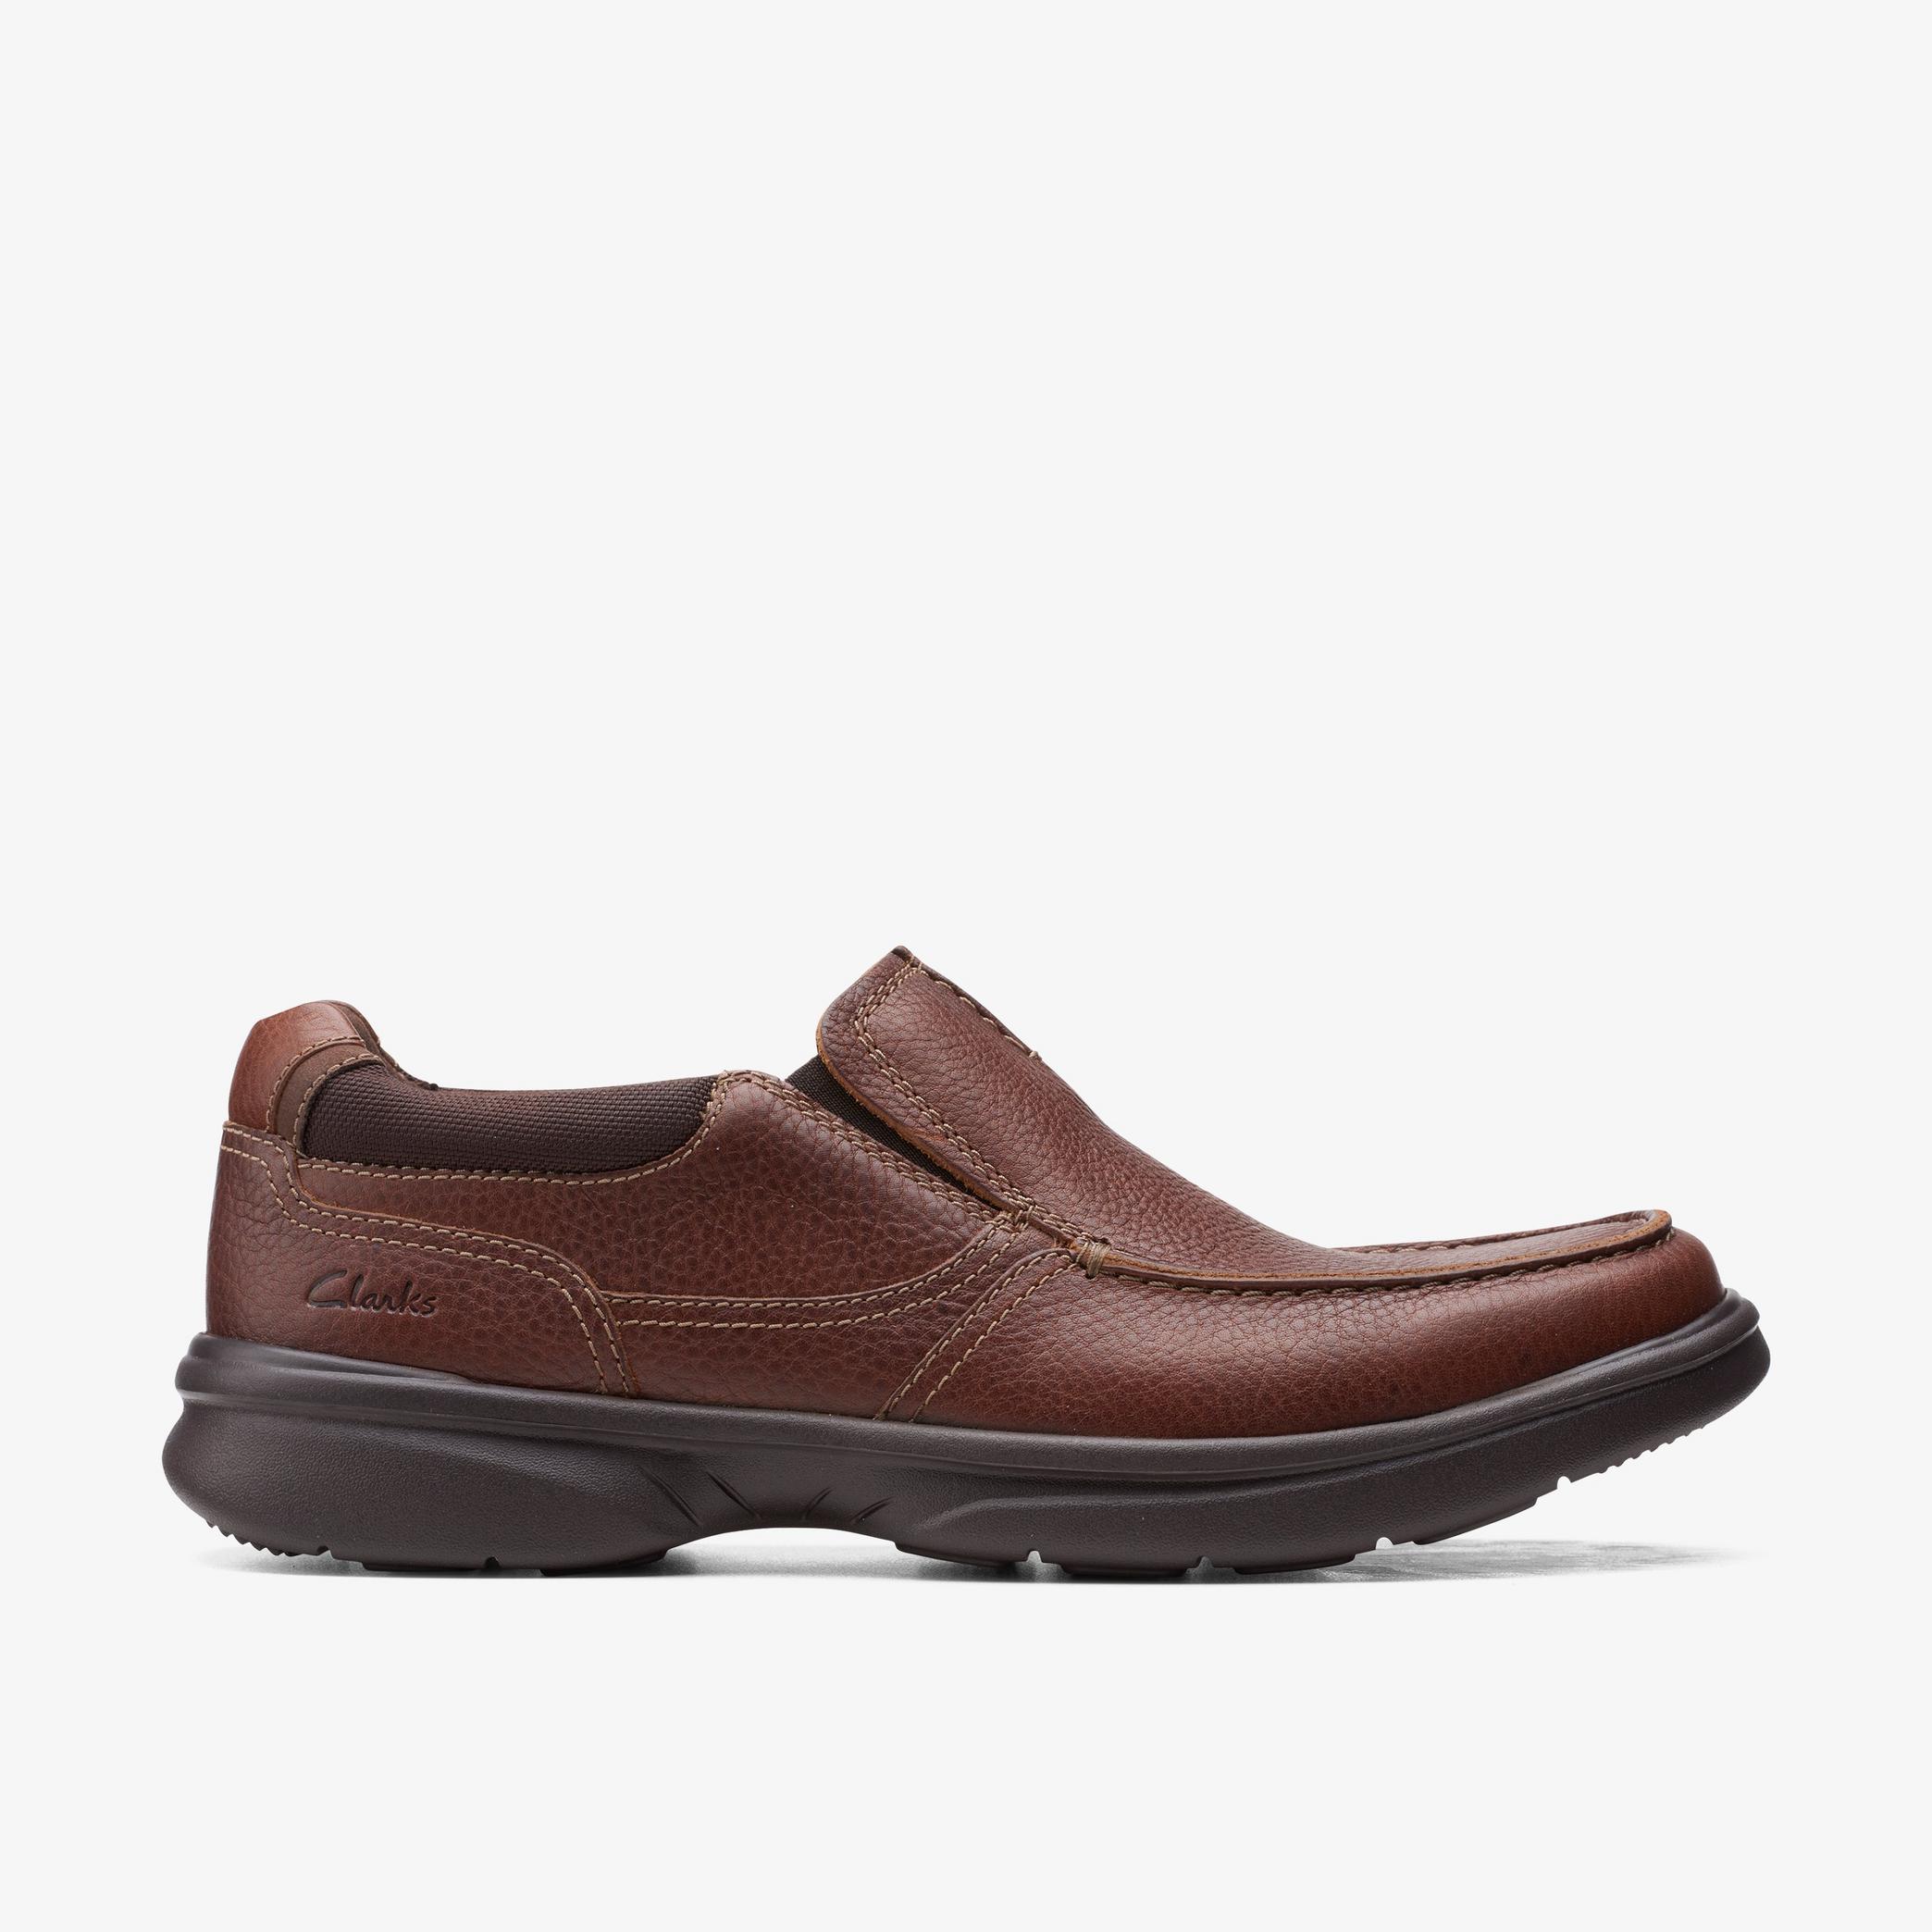 Mens Bradley Free Tan Tumbled Loafer Shoes